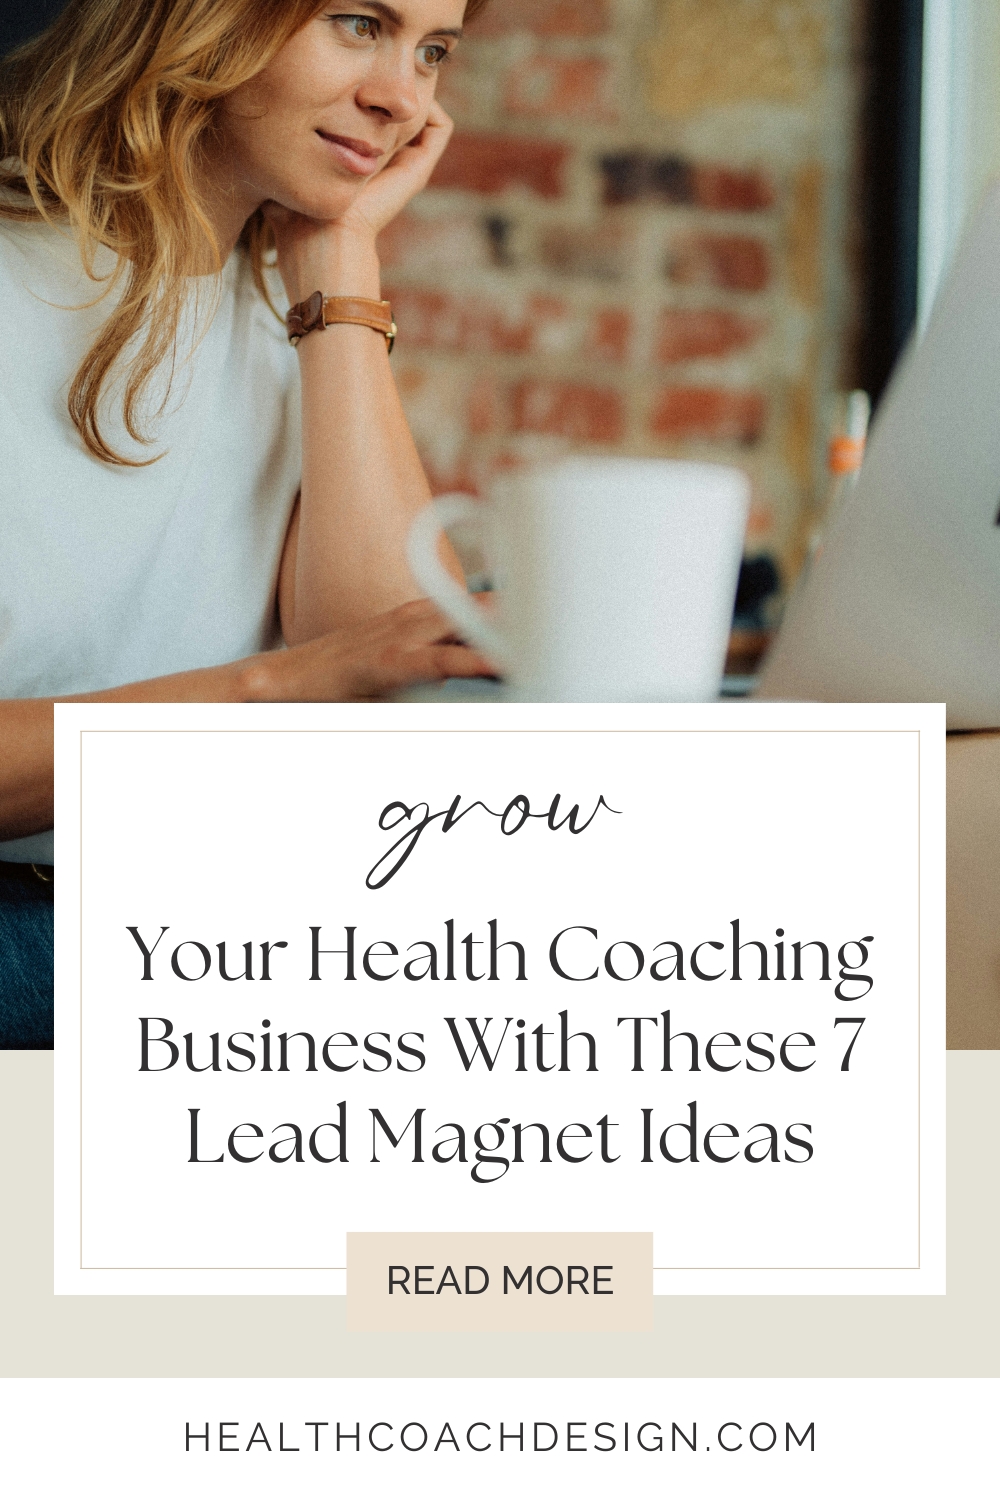 Pinterest pin for blog post titled "Grow Your Health Coaching Business With These 7 Lead Magnet Ideas." Woman in photo is sitting at a coffee shop table typing on her laptop with a coffee mug next to the device.